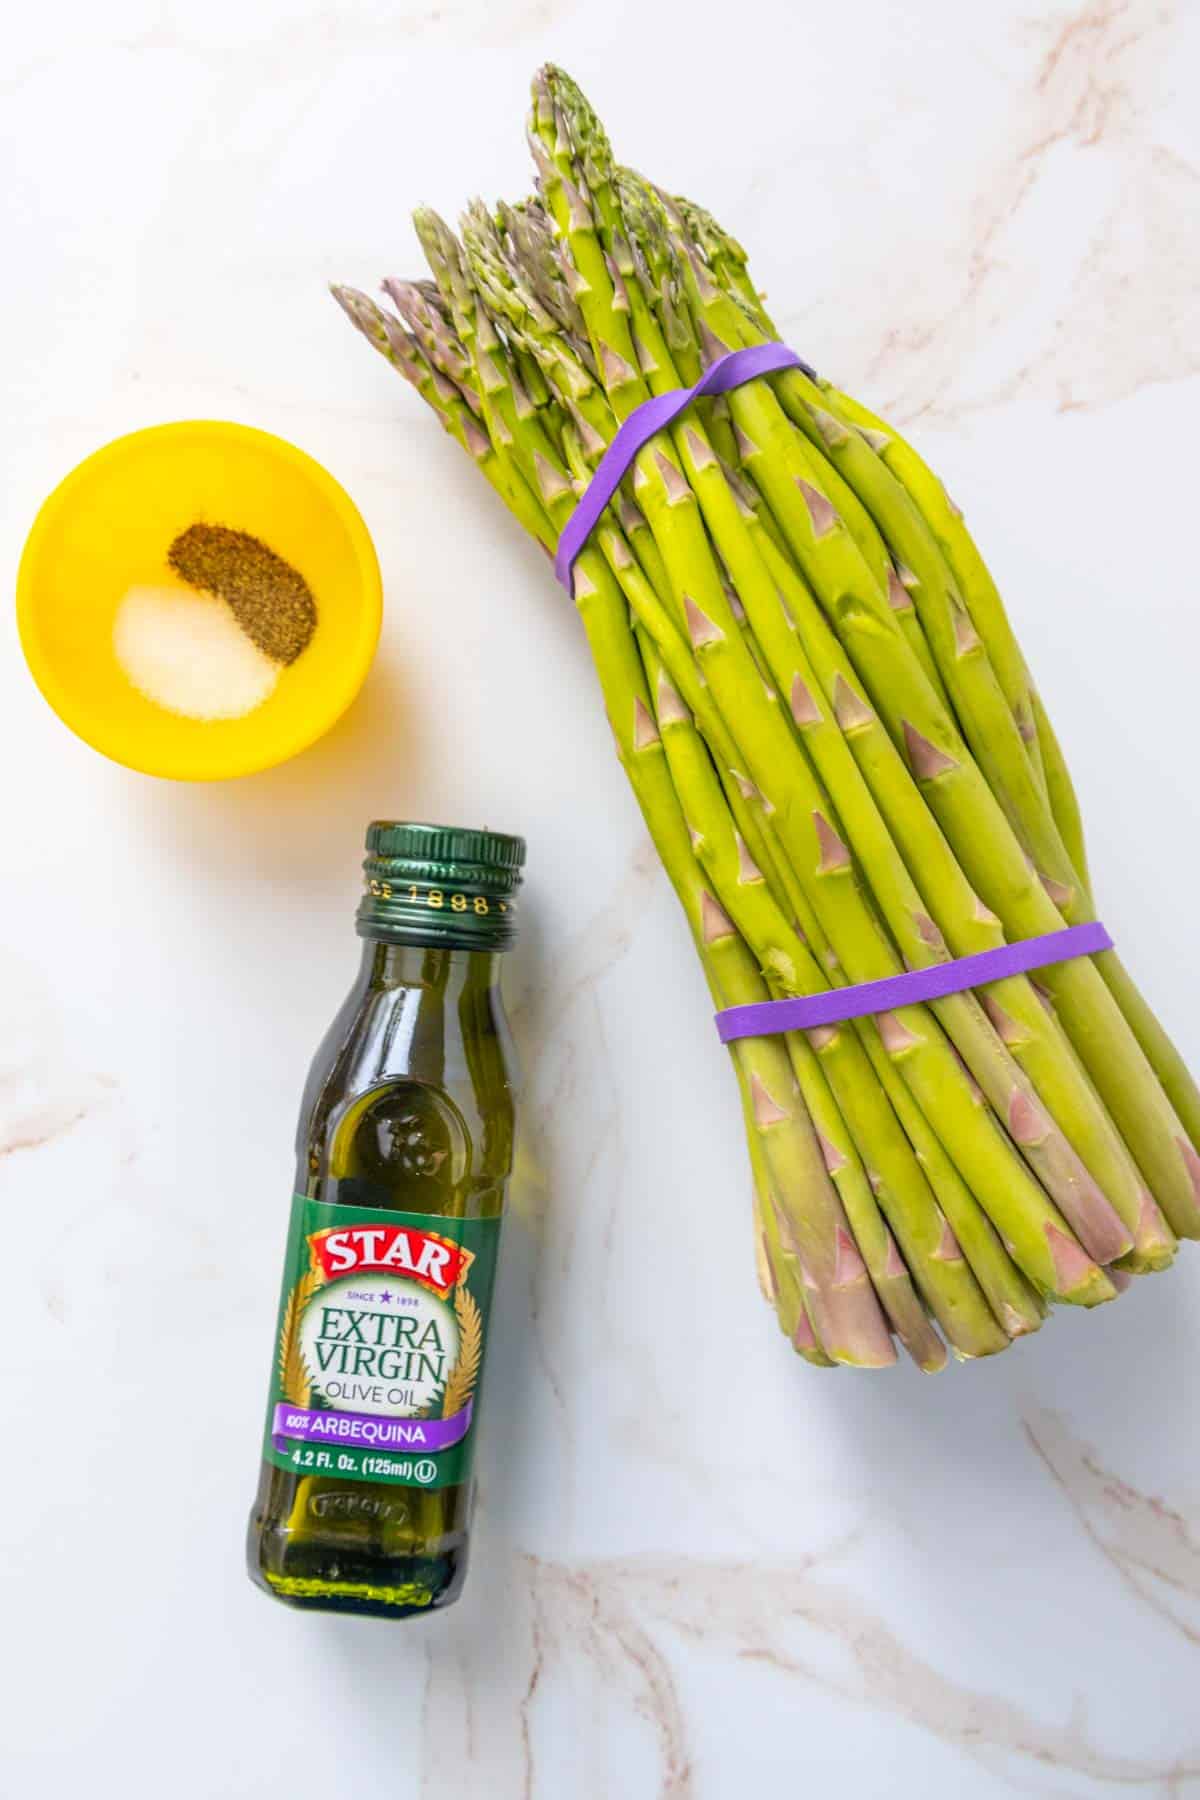 Ingredients for roasted asparagus on a marble surface.